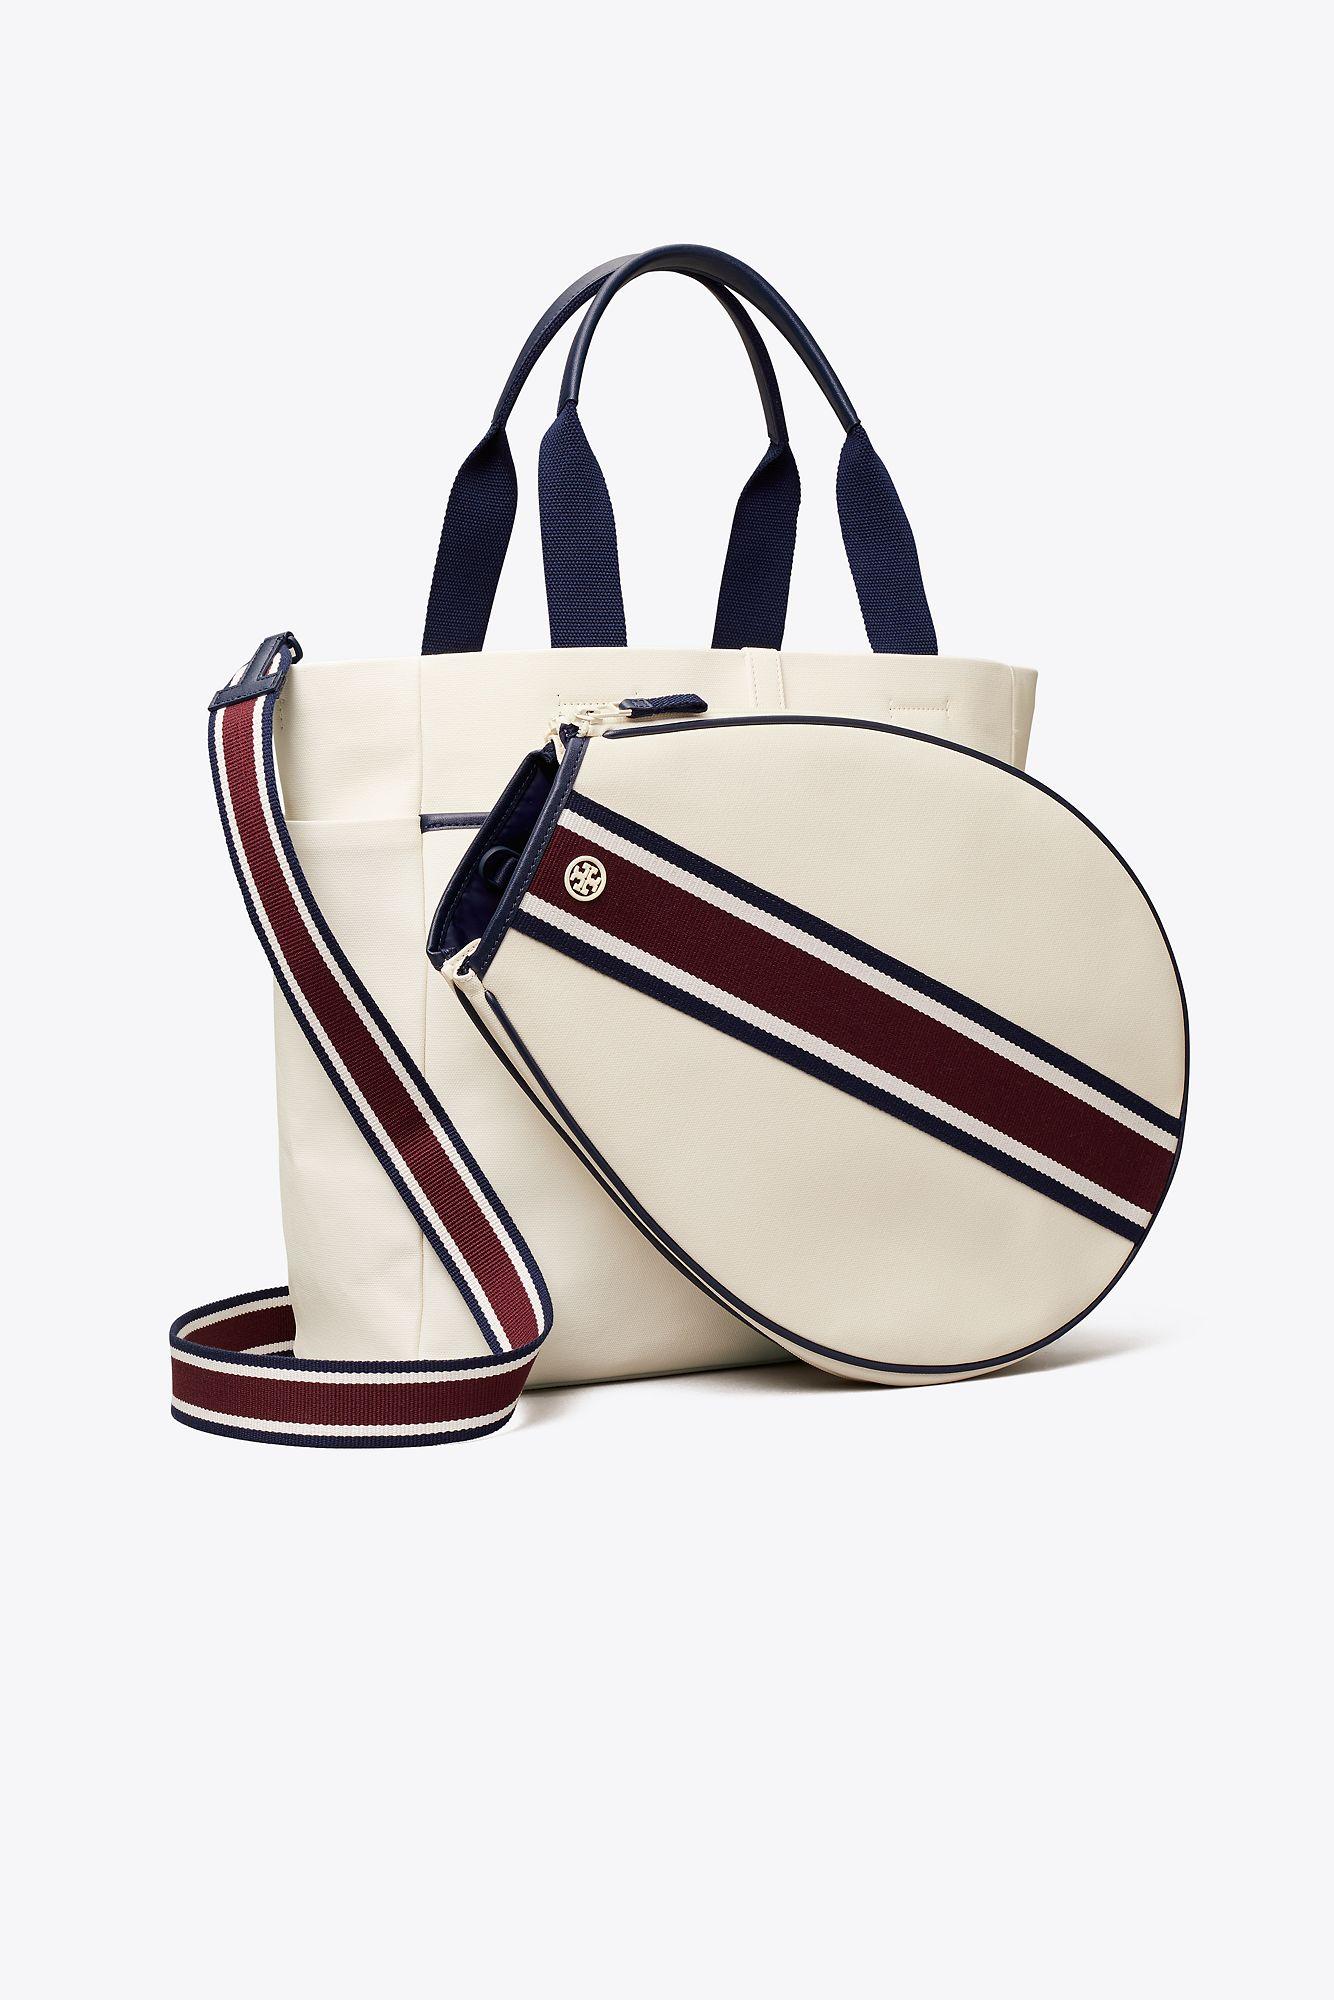 Tory Burch Tote Bag in Brown Leather with Front White Stripe